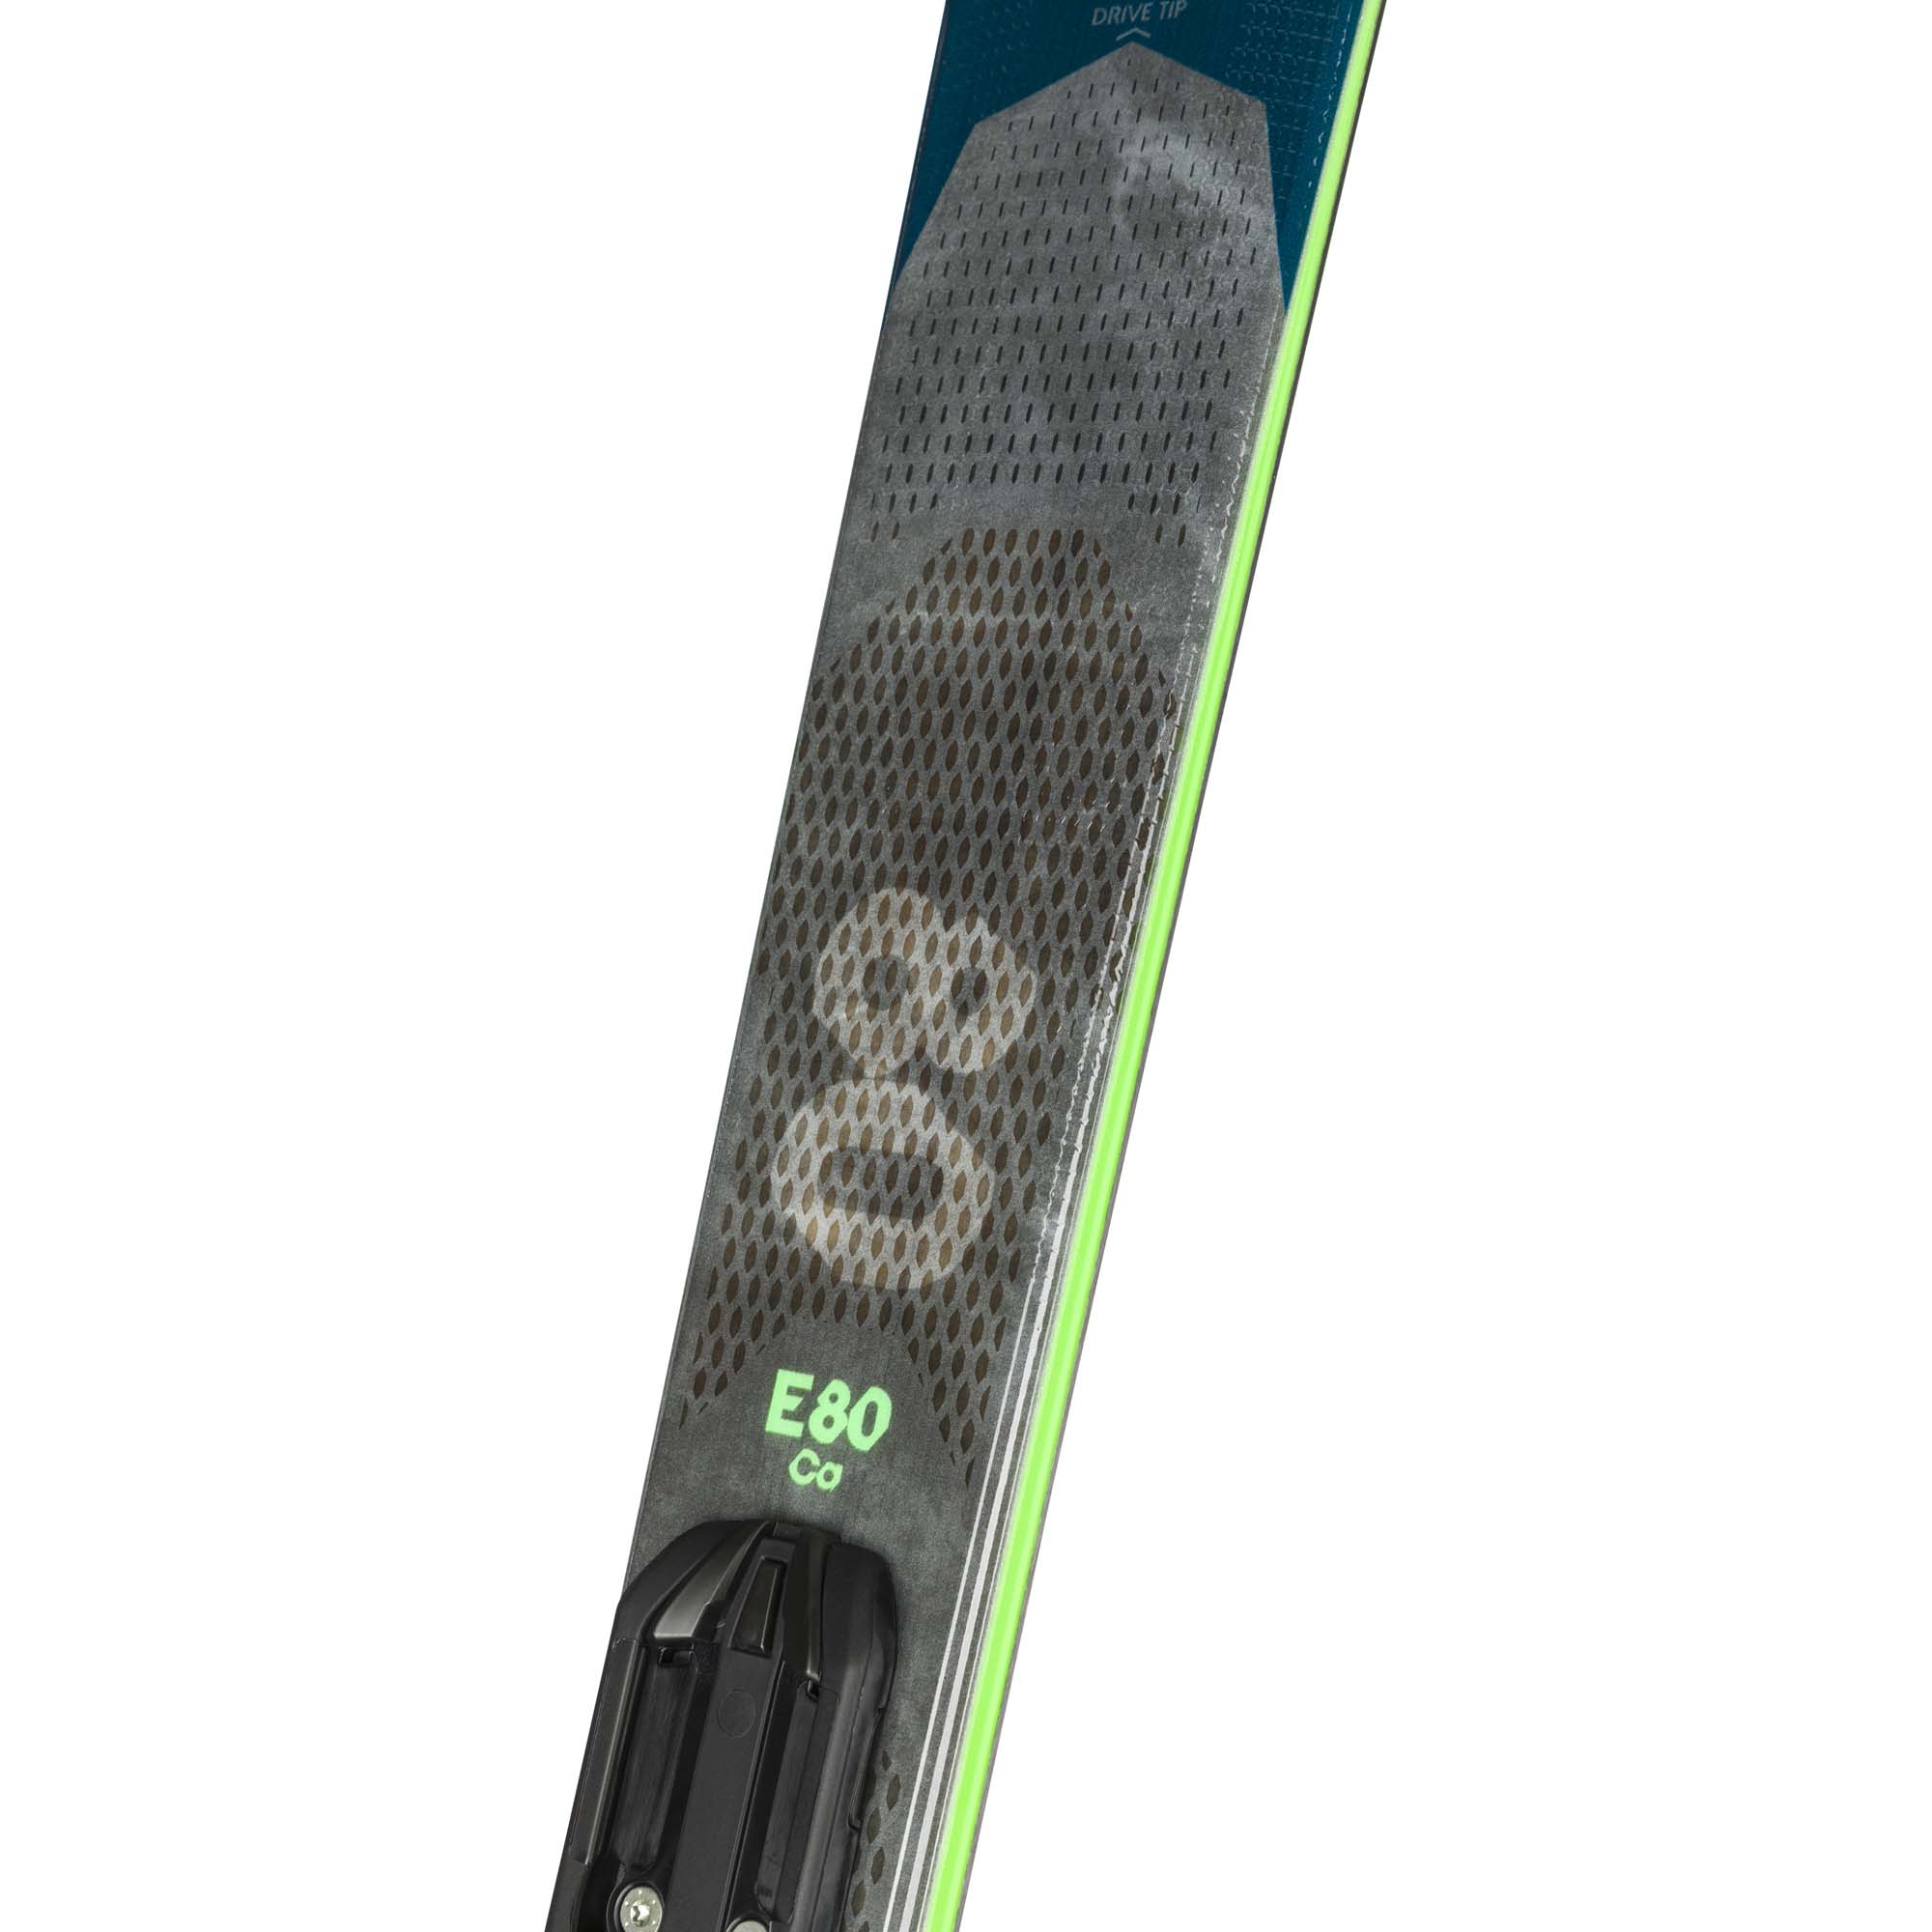 Rossignol Experience 80 Carbon Xpress Skis